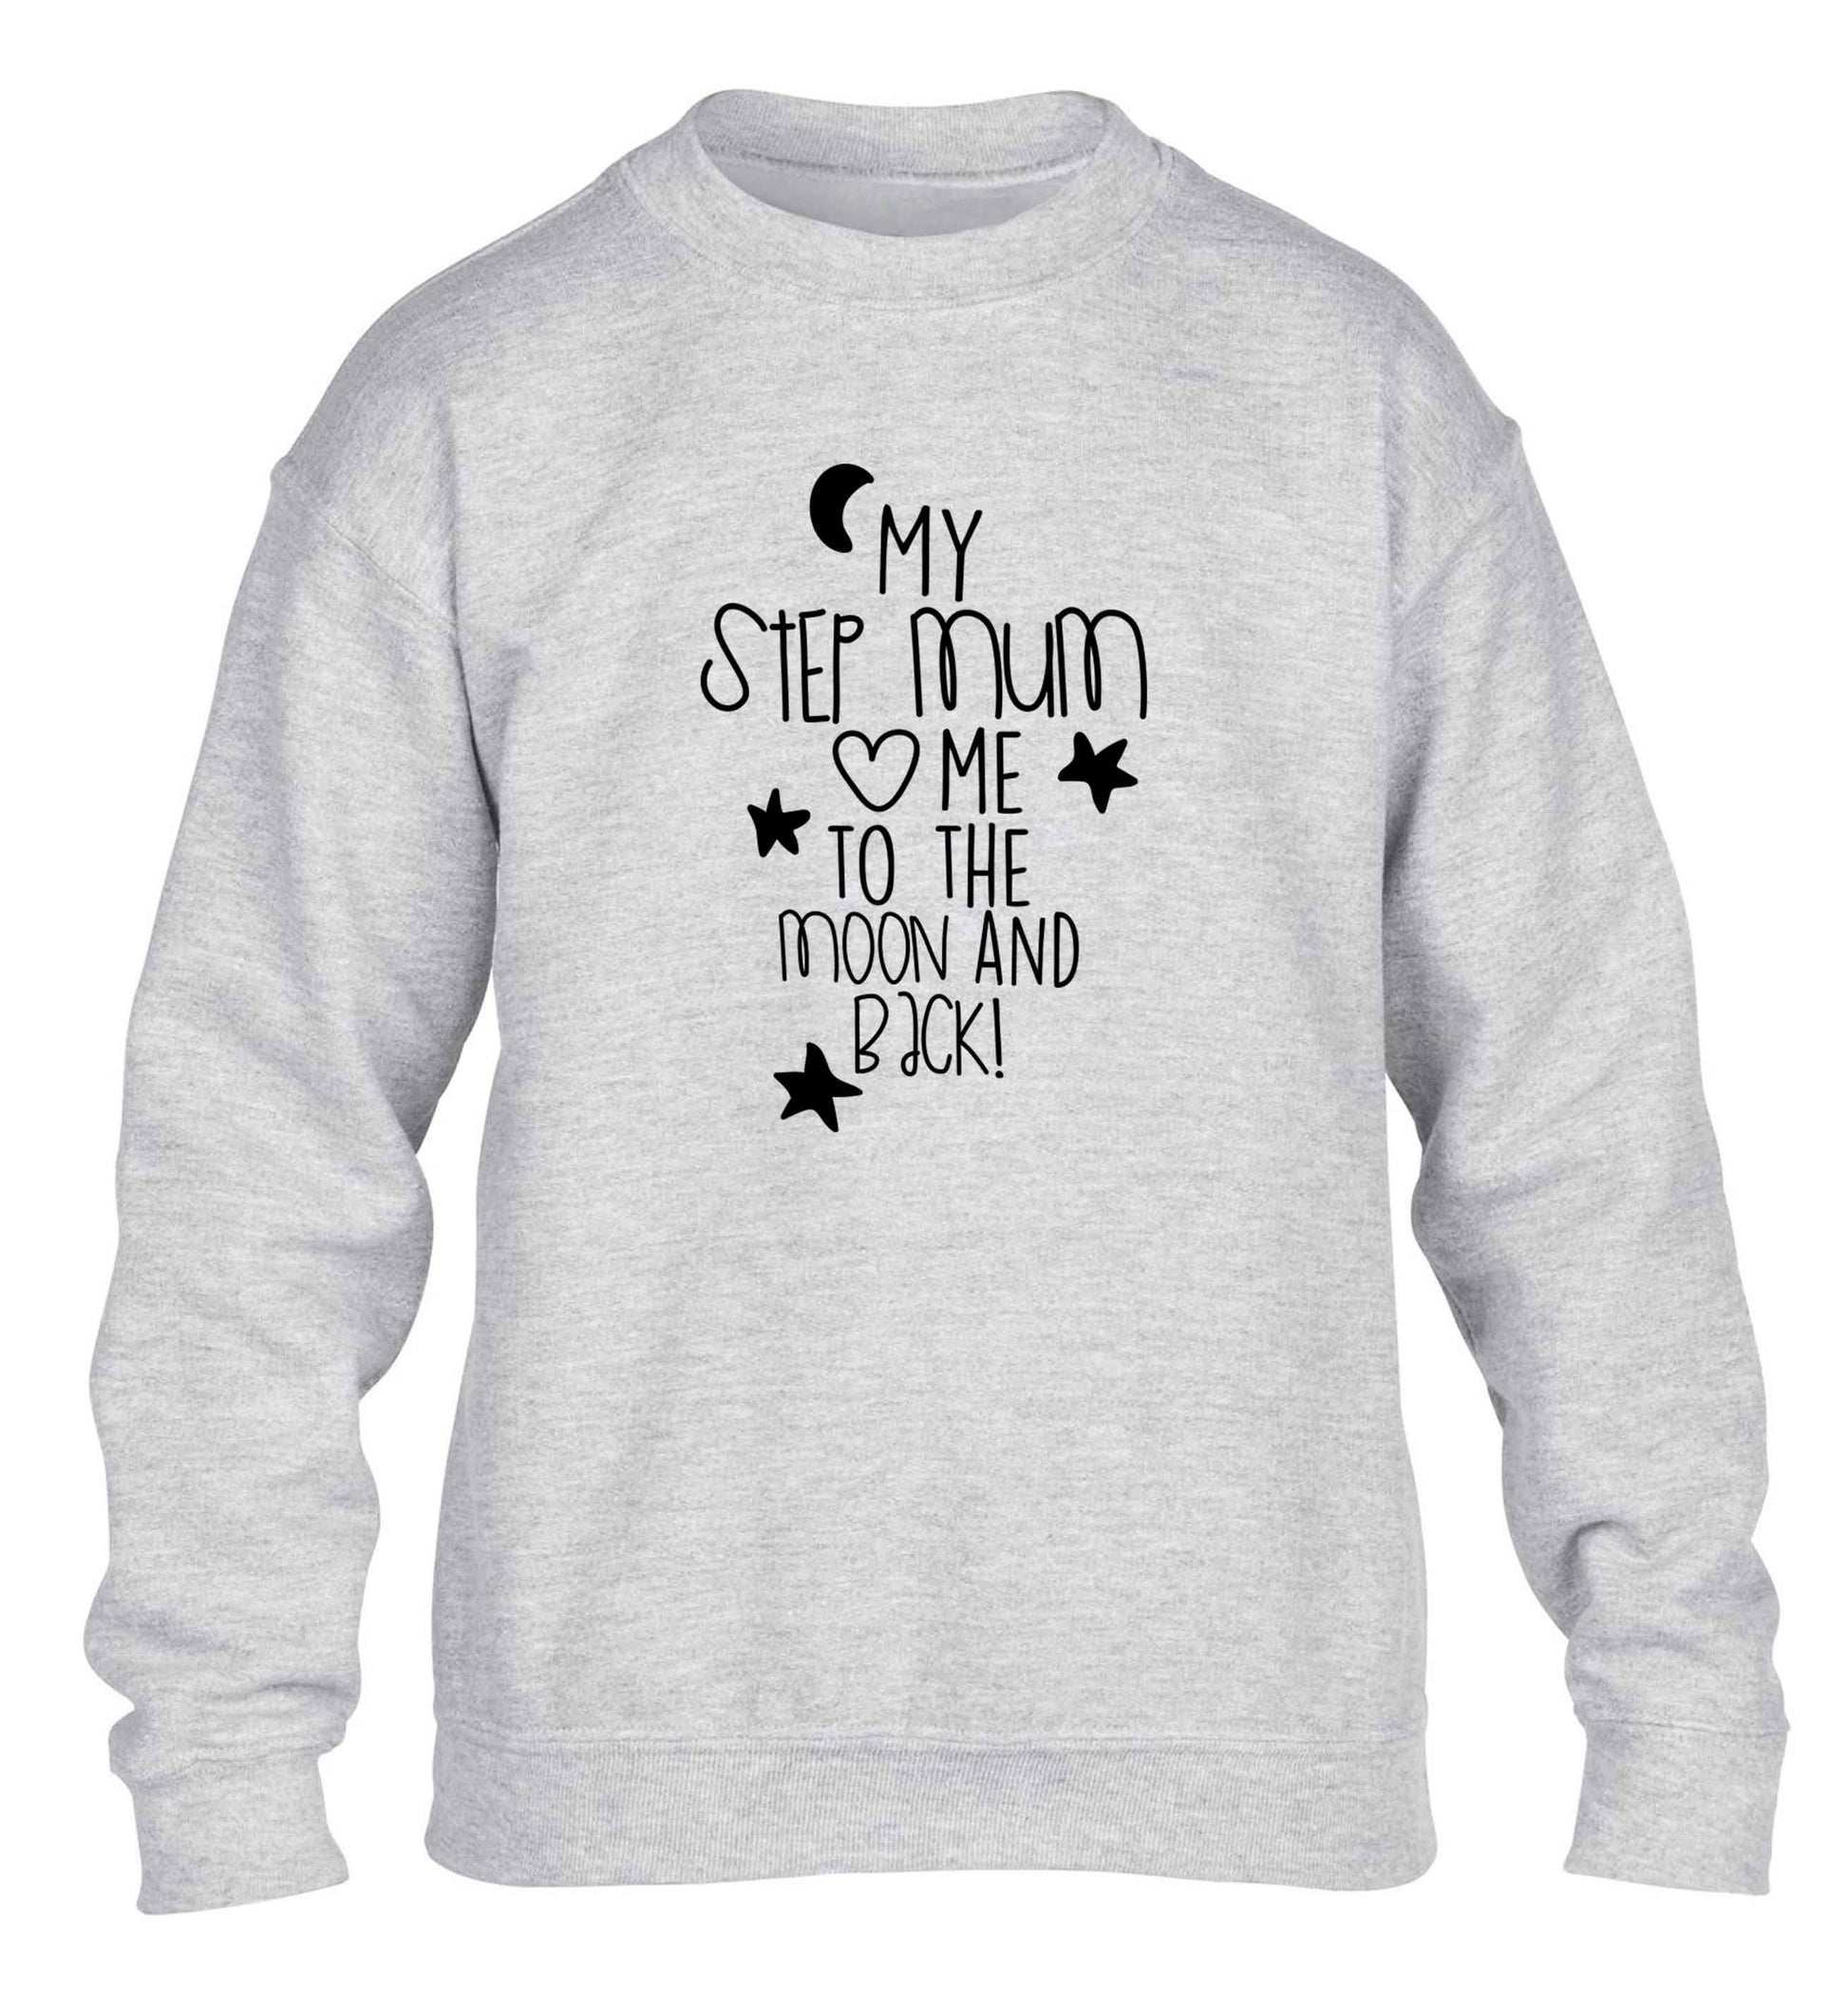 My step-mum loves me to the moon and back children's grey sweater 12-13 Years